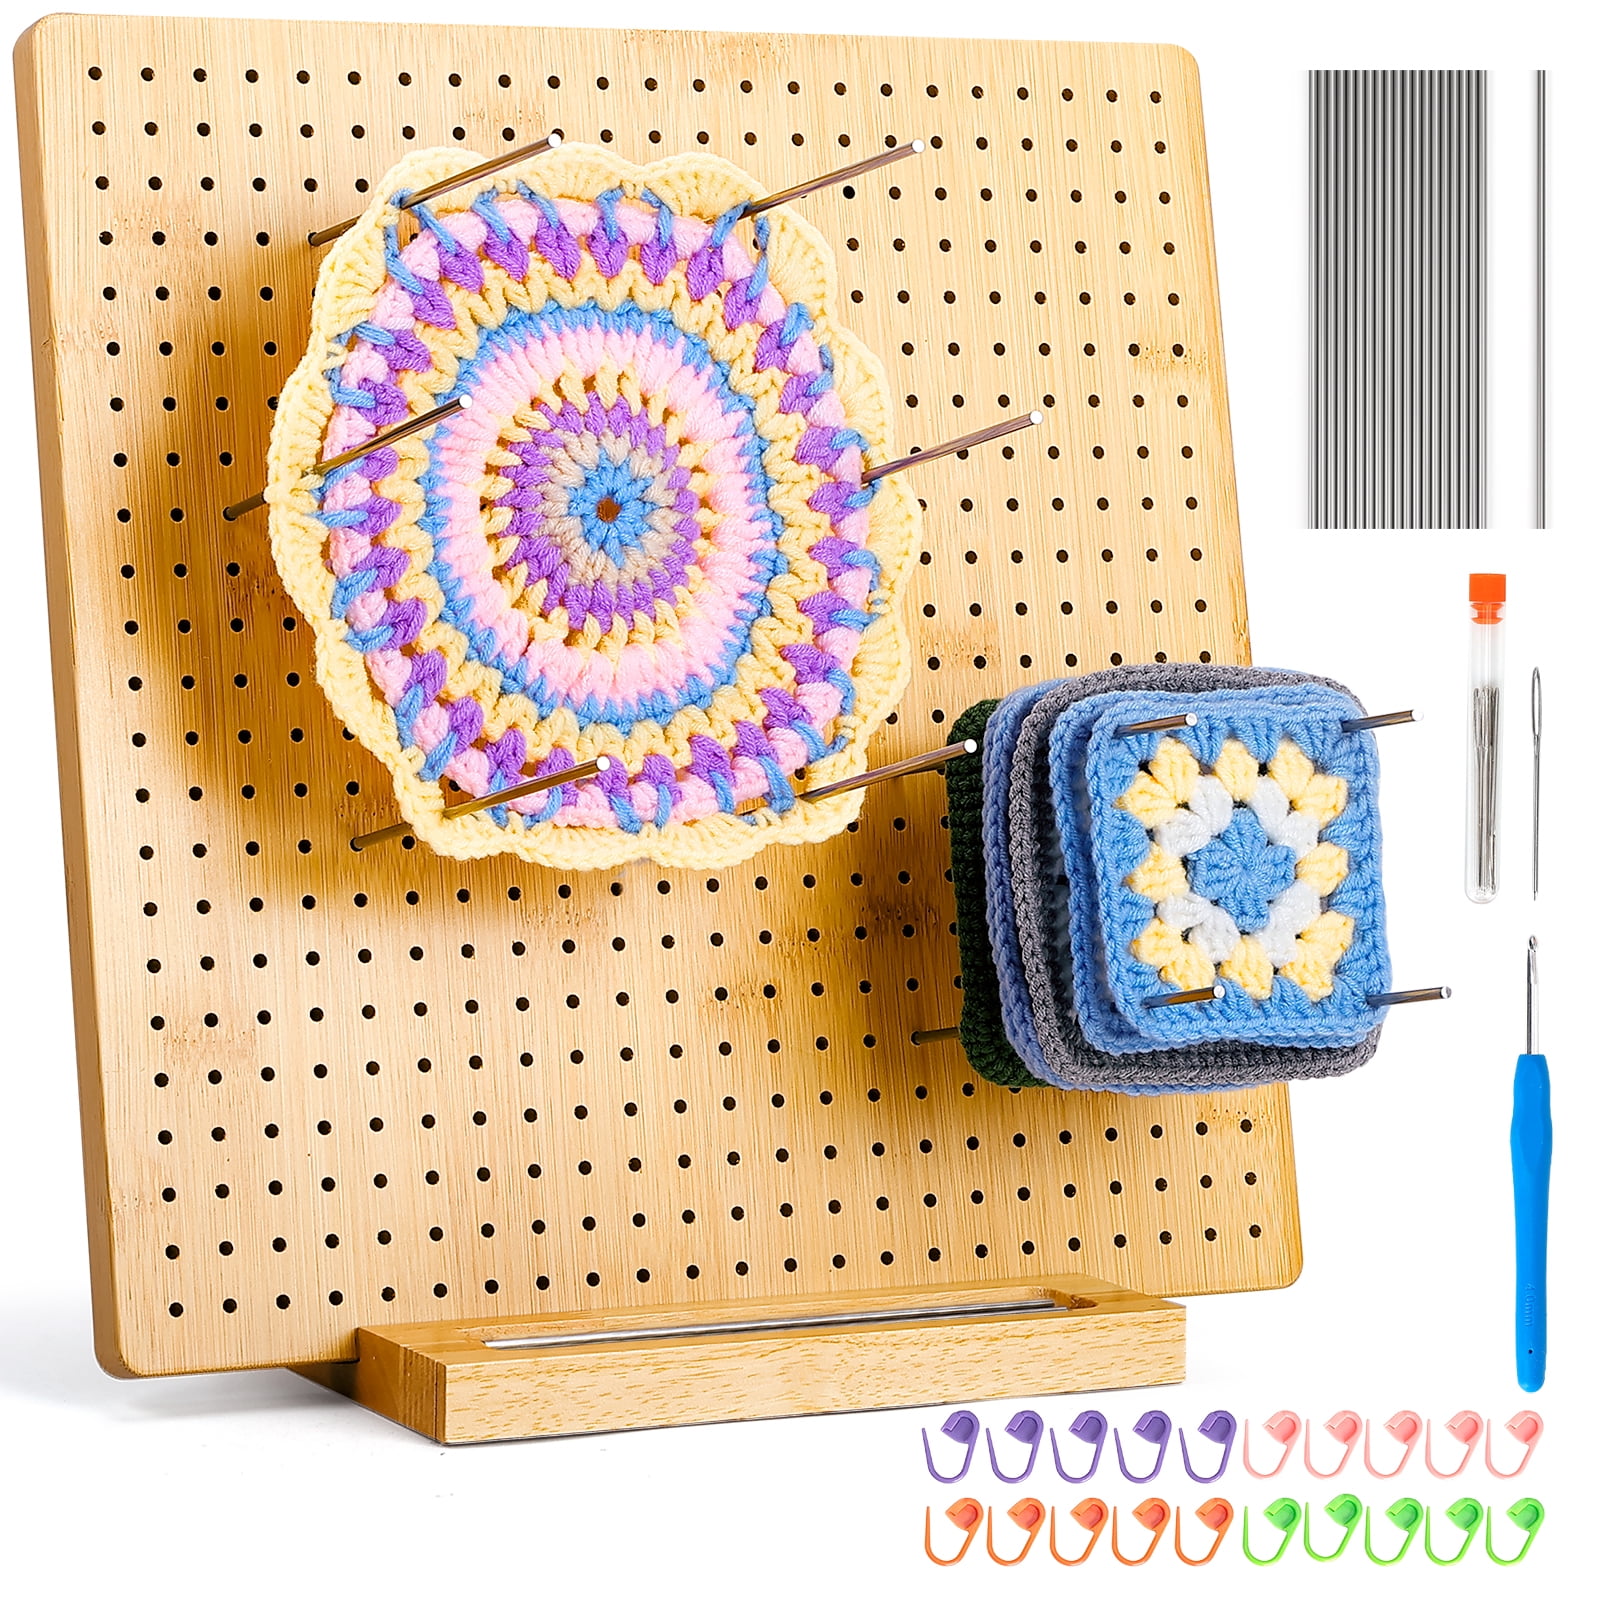 uywapvt Crochet Blocking Board, 9.3 Wooden Knitting Blocking Mats, Handcrafted Blocking Mats and Pins for Knitting and Crochet Projects, Granny Squares